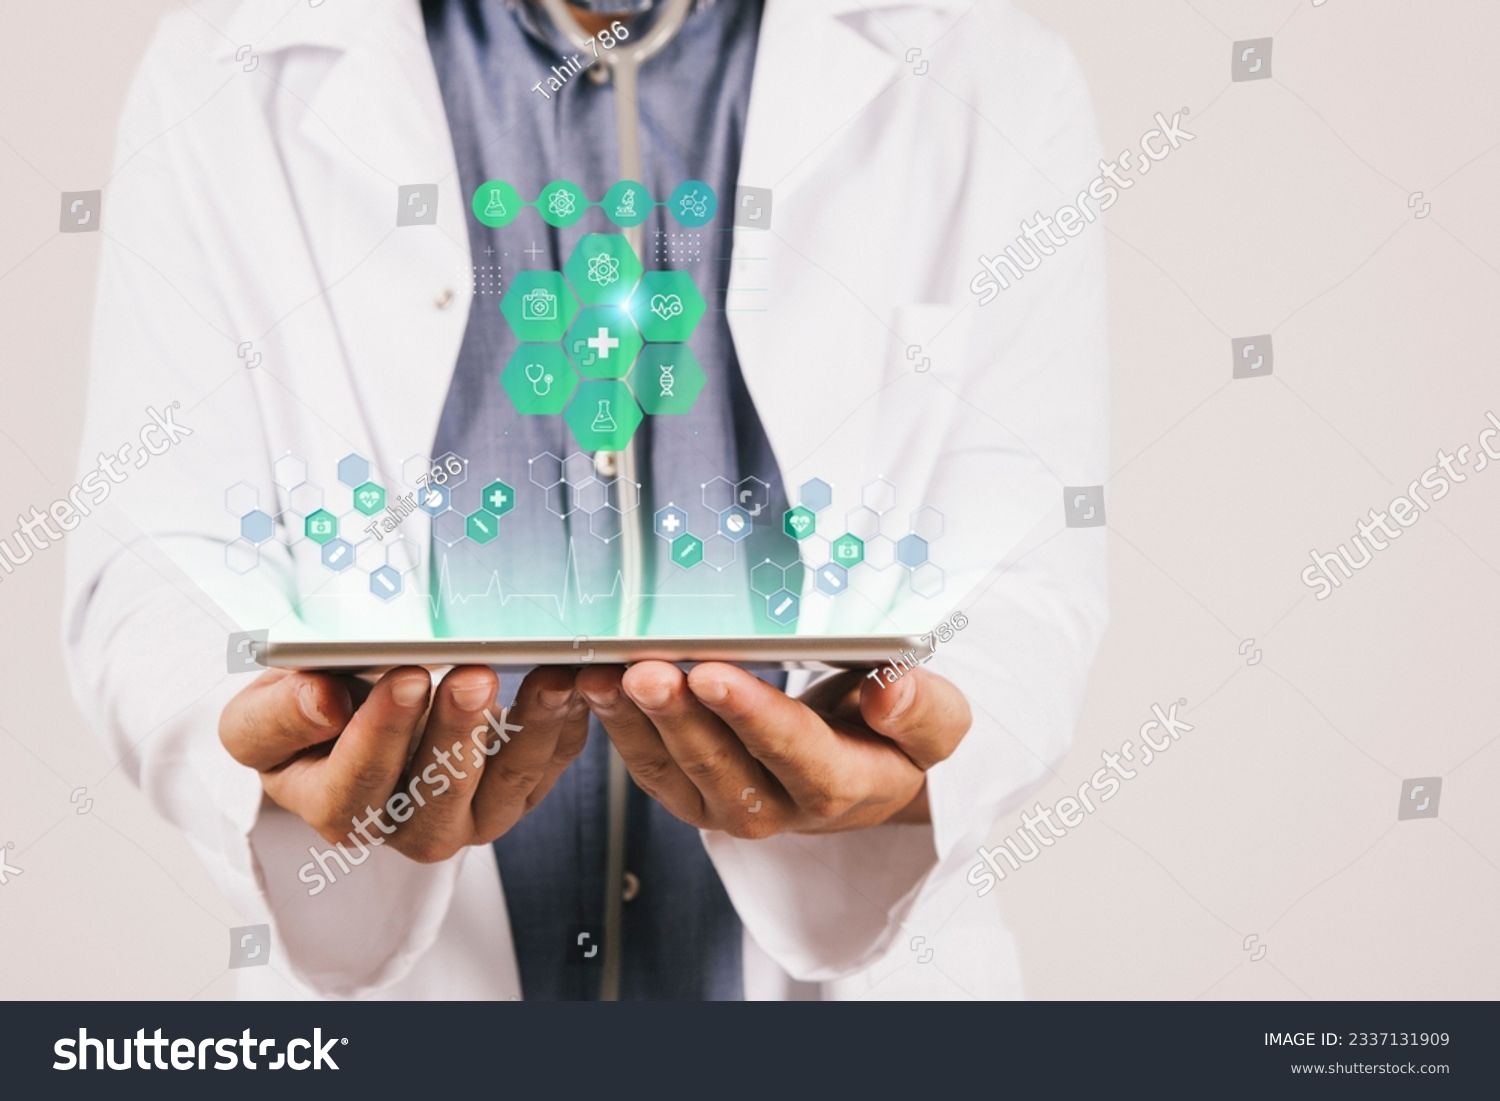 Doctor's Tech Toolkit: Handheld Device Displaying a Set of Technology Icons #2337131909